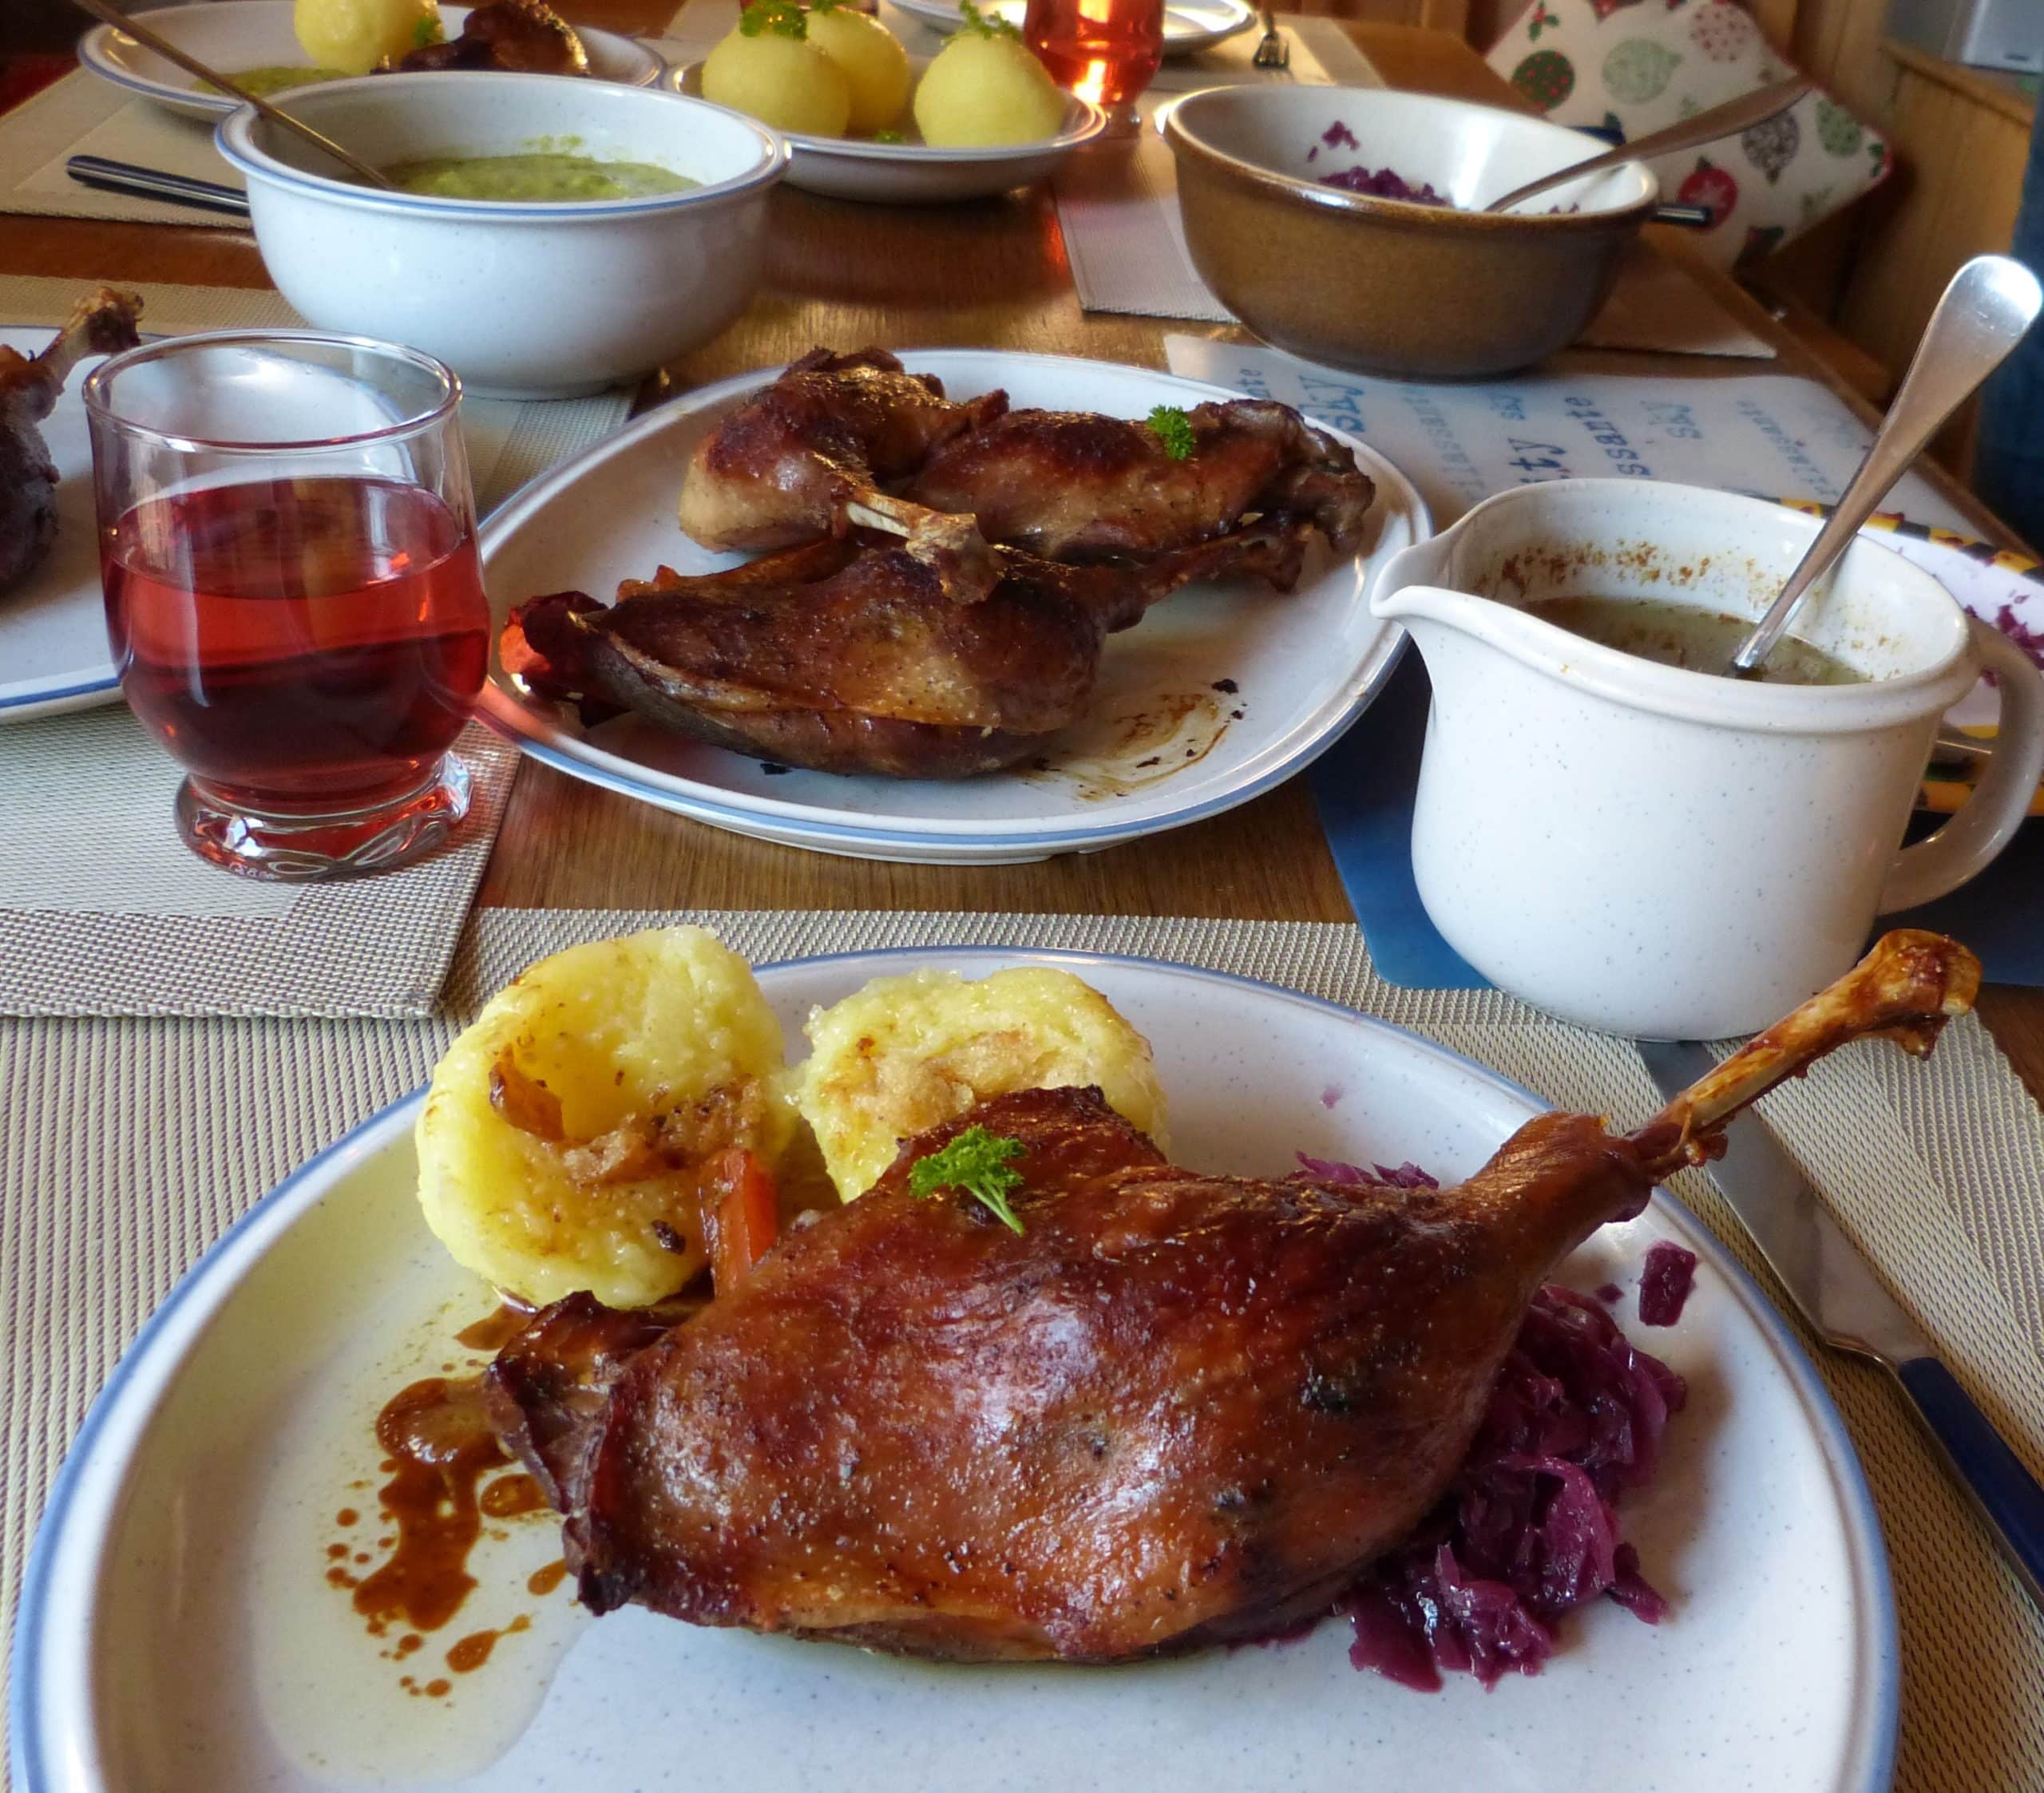 Sunday lunch in Bavaria: Beautifully golden brown German roasted goose legs and gravy served with  potato dumplings, savoy cabbage (Wirsing), and blaukraut.